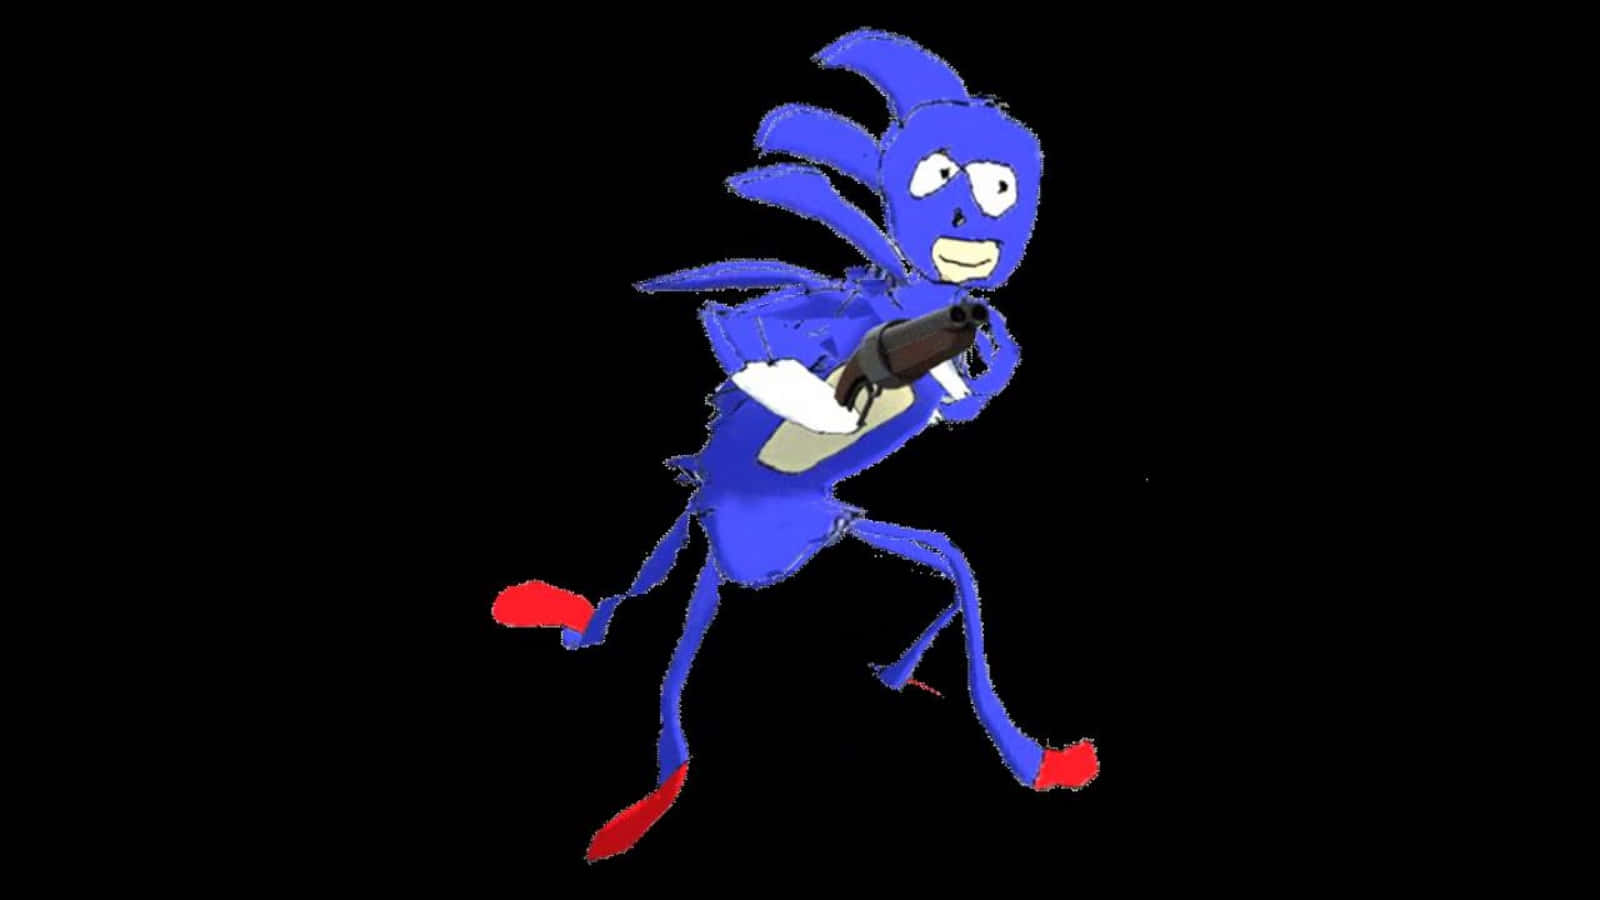 Sanic, The Speedy Blue Hedgehog In An Action Pose. Background